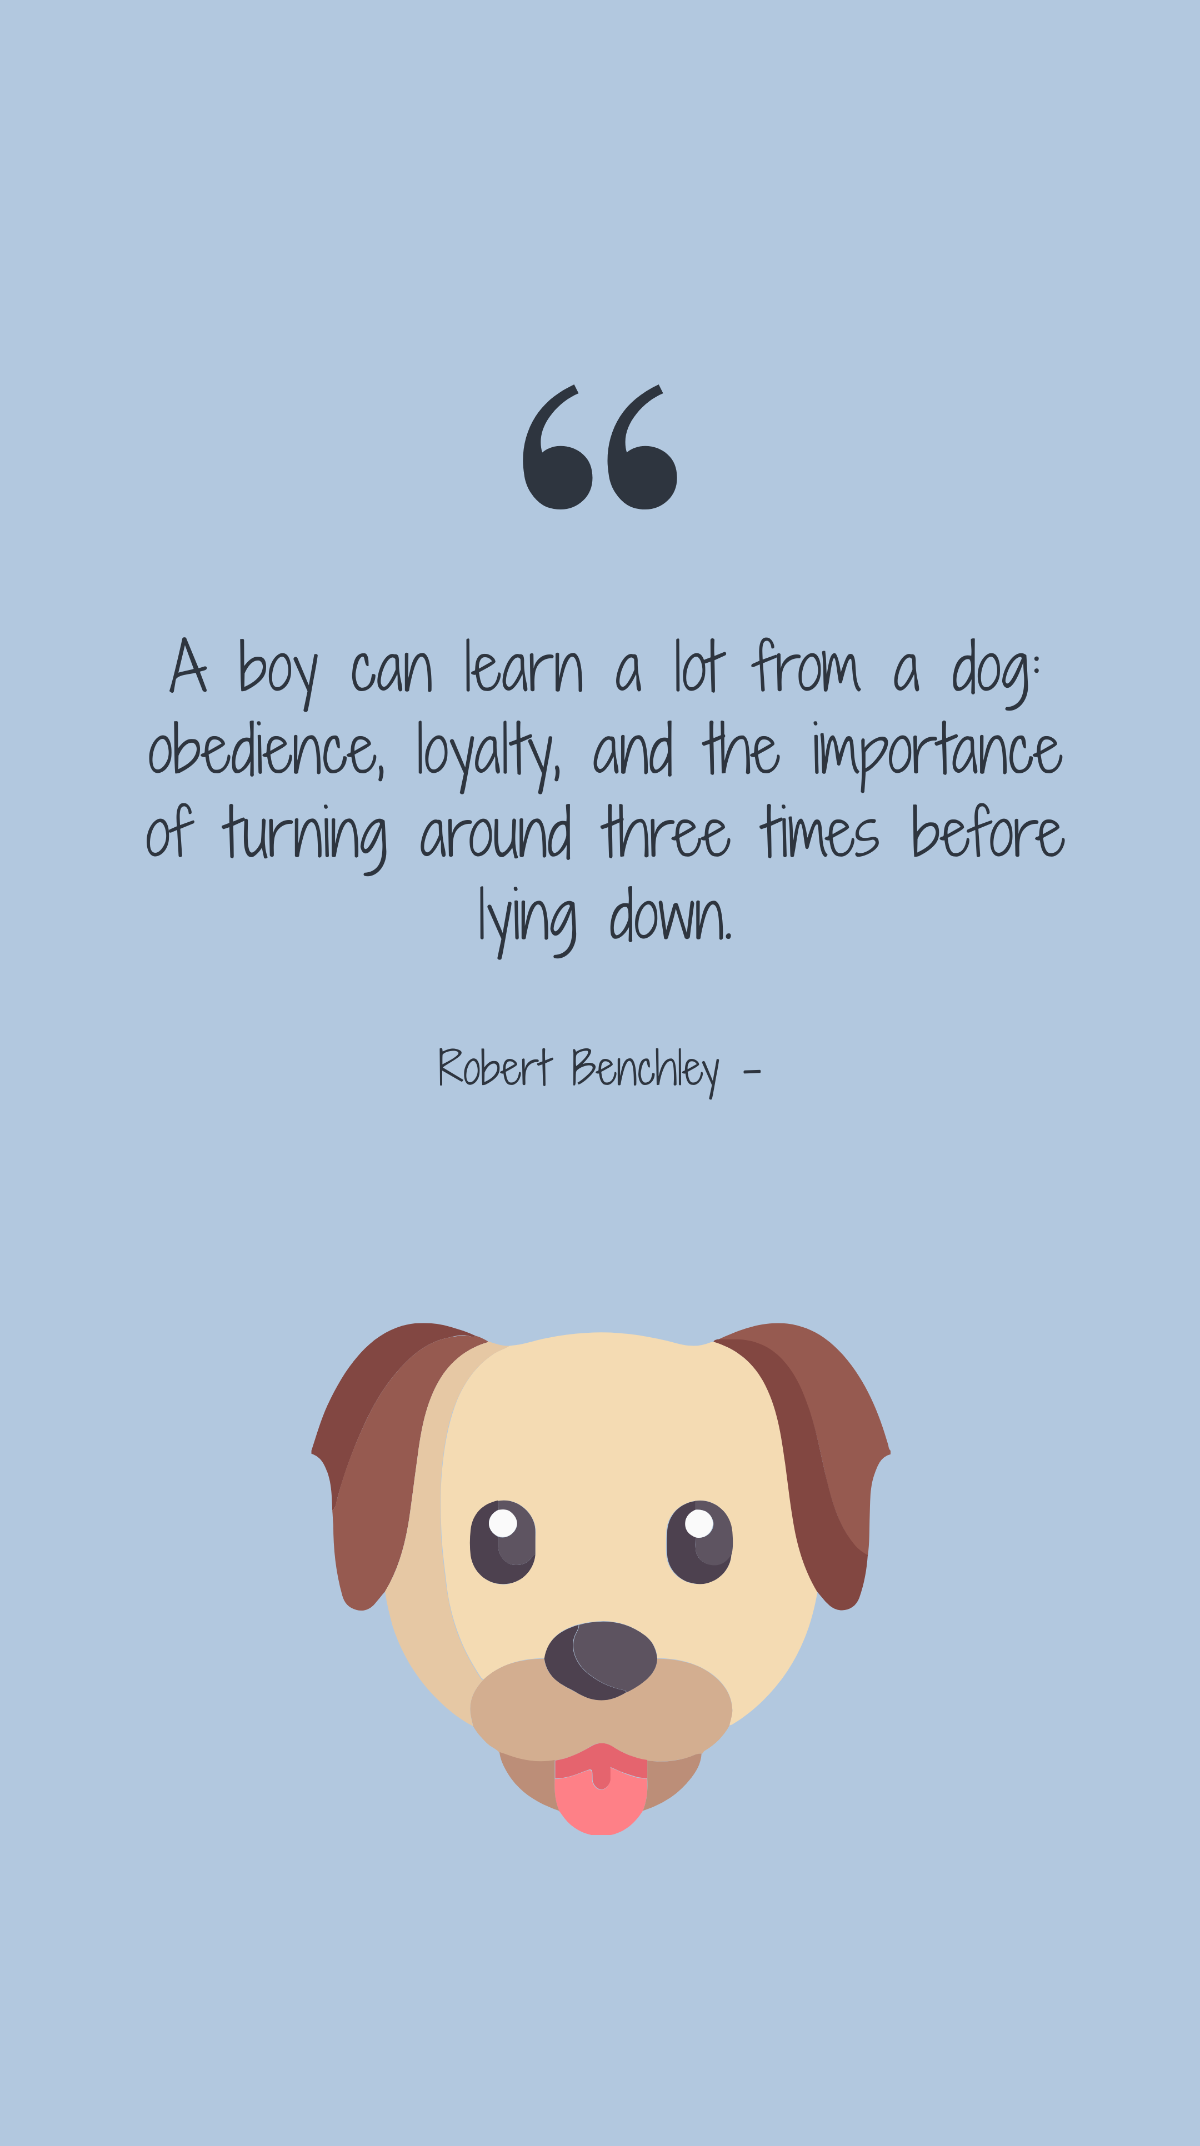 Robert Benchley - A boy can learn a lot from a dog: obedience, loyalty, and the importance of turning around three times before lying down.